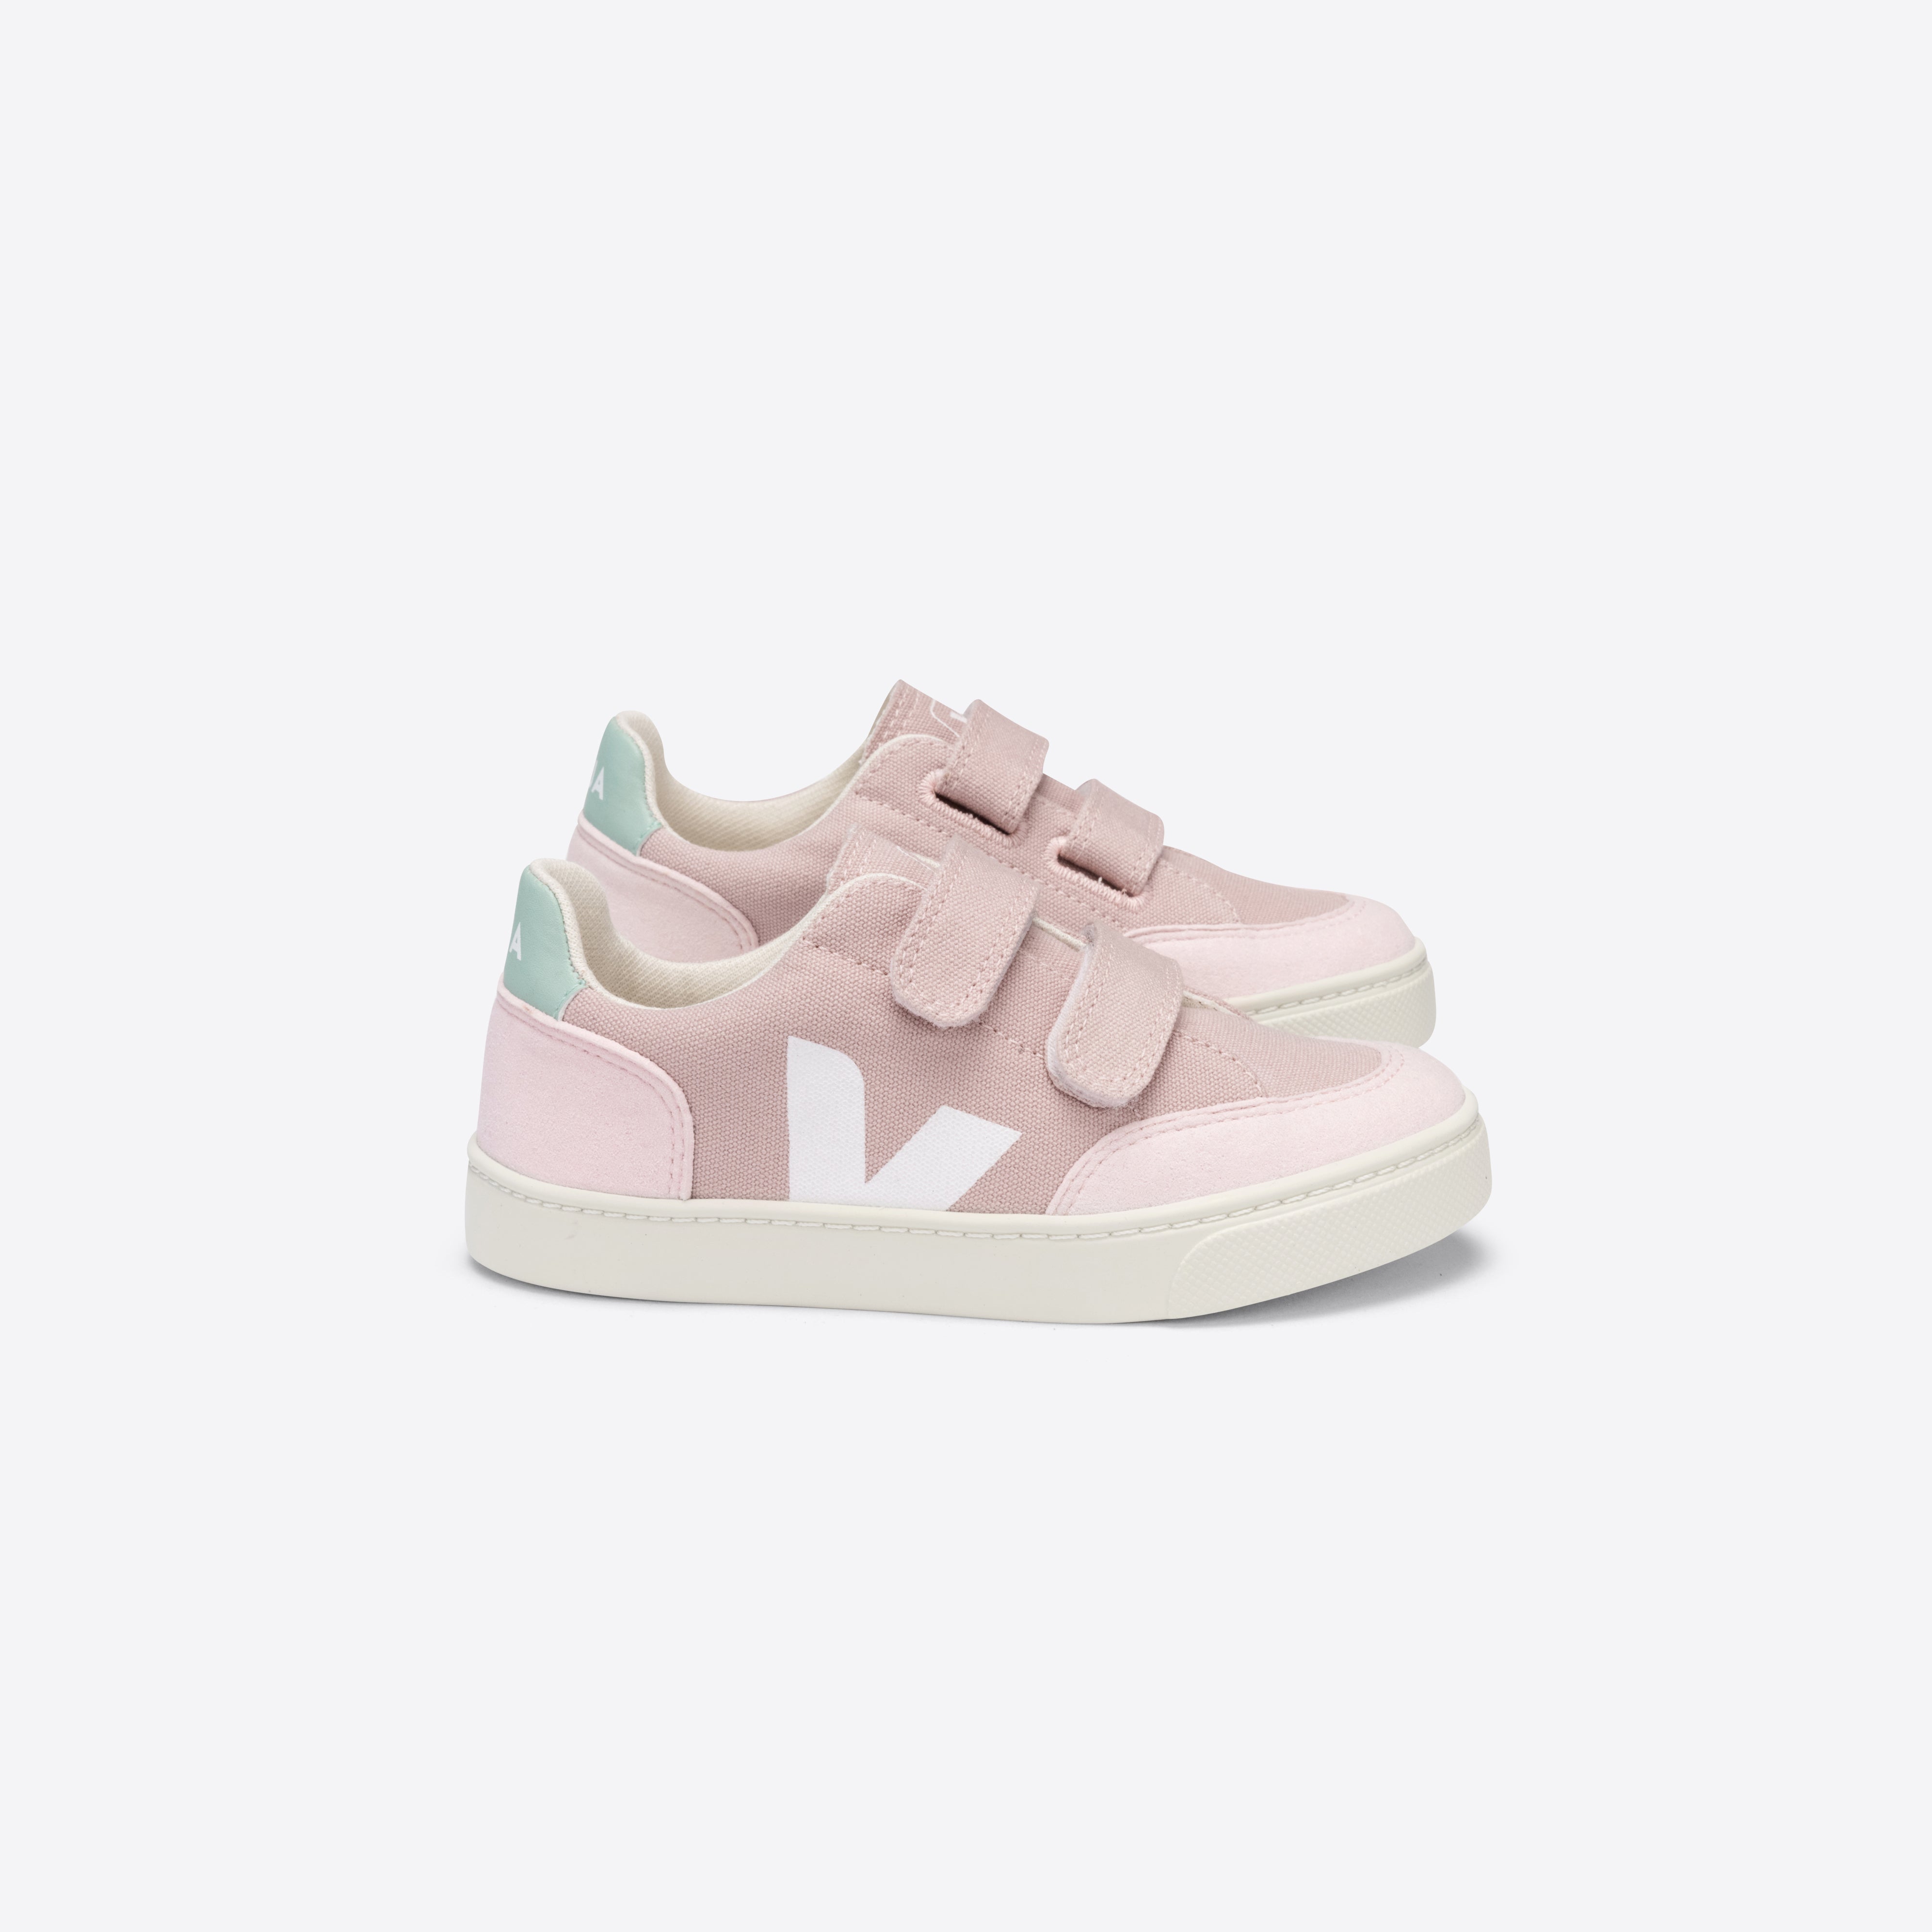 Girls Pink "SMALL V-12" Velcro Canvas Shoes